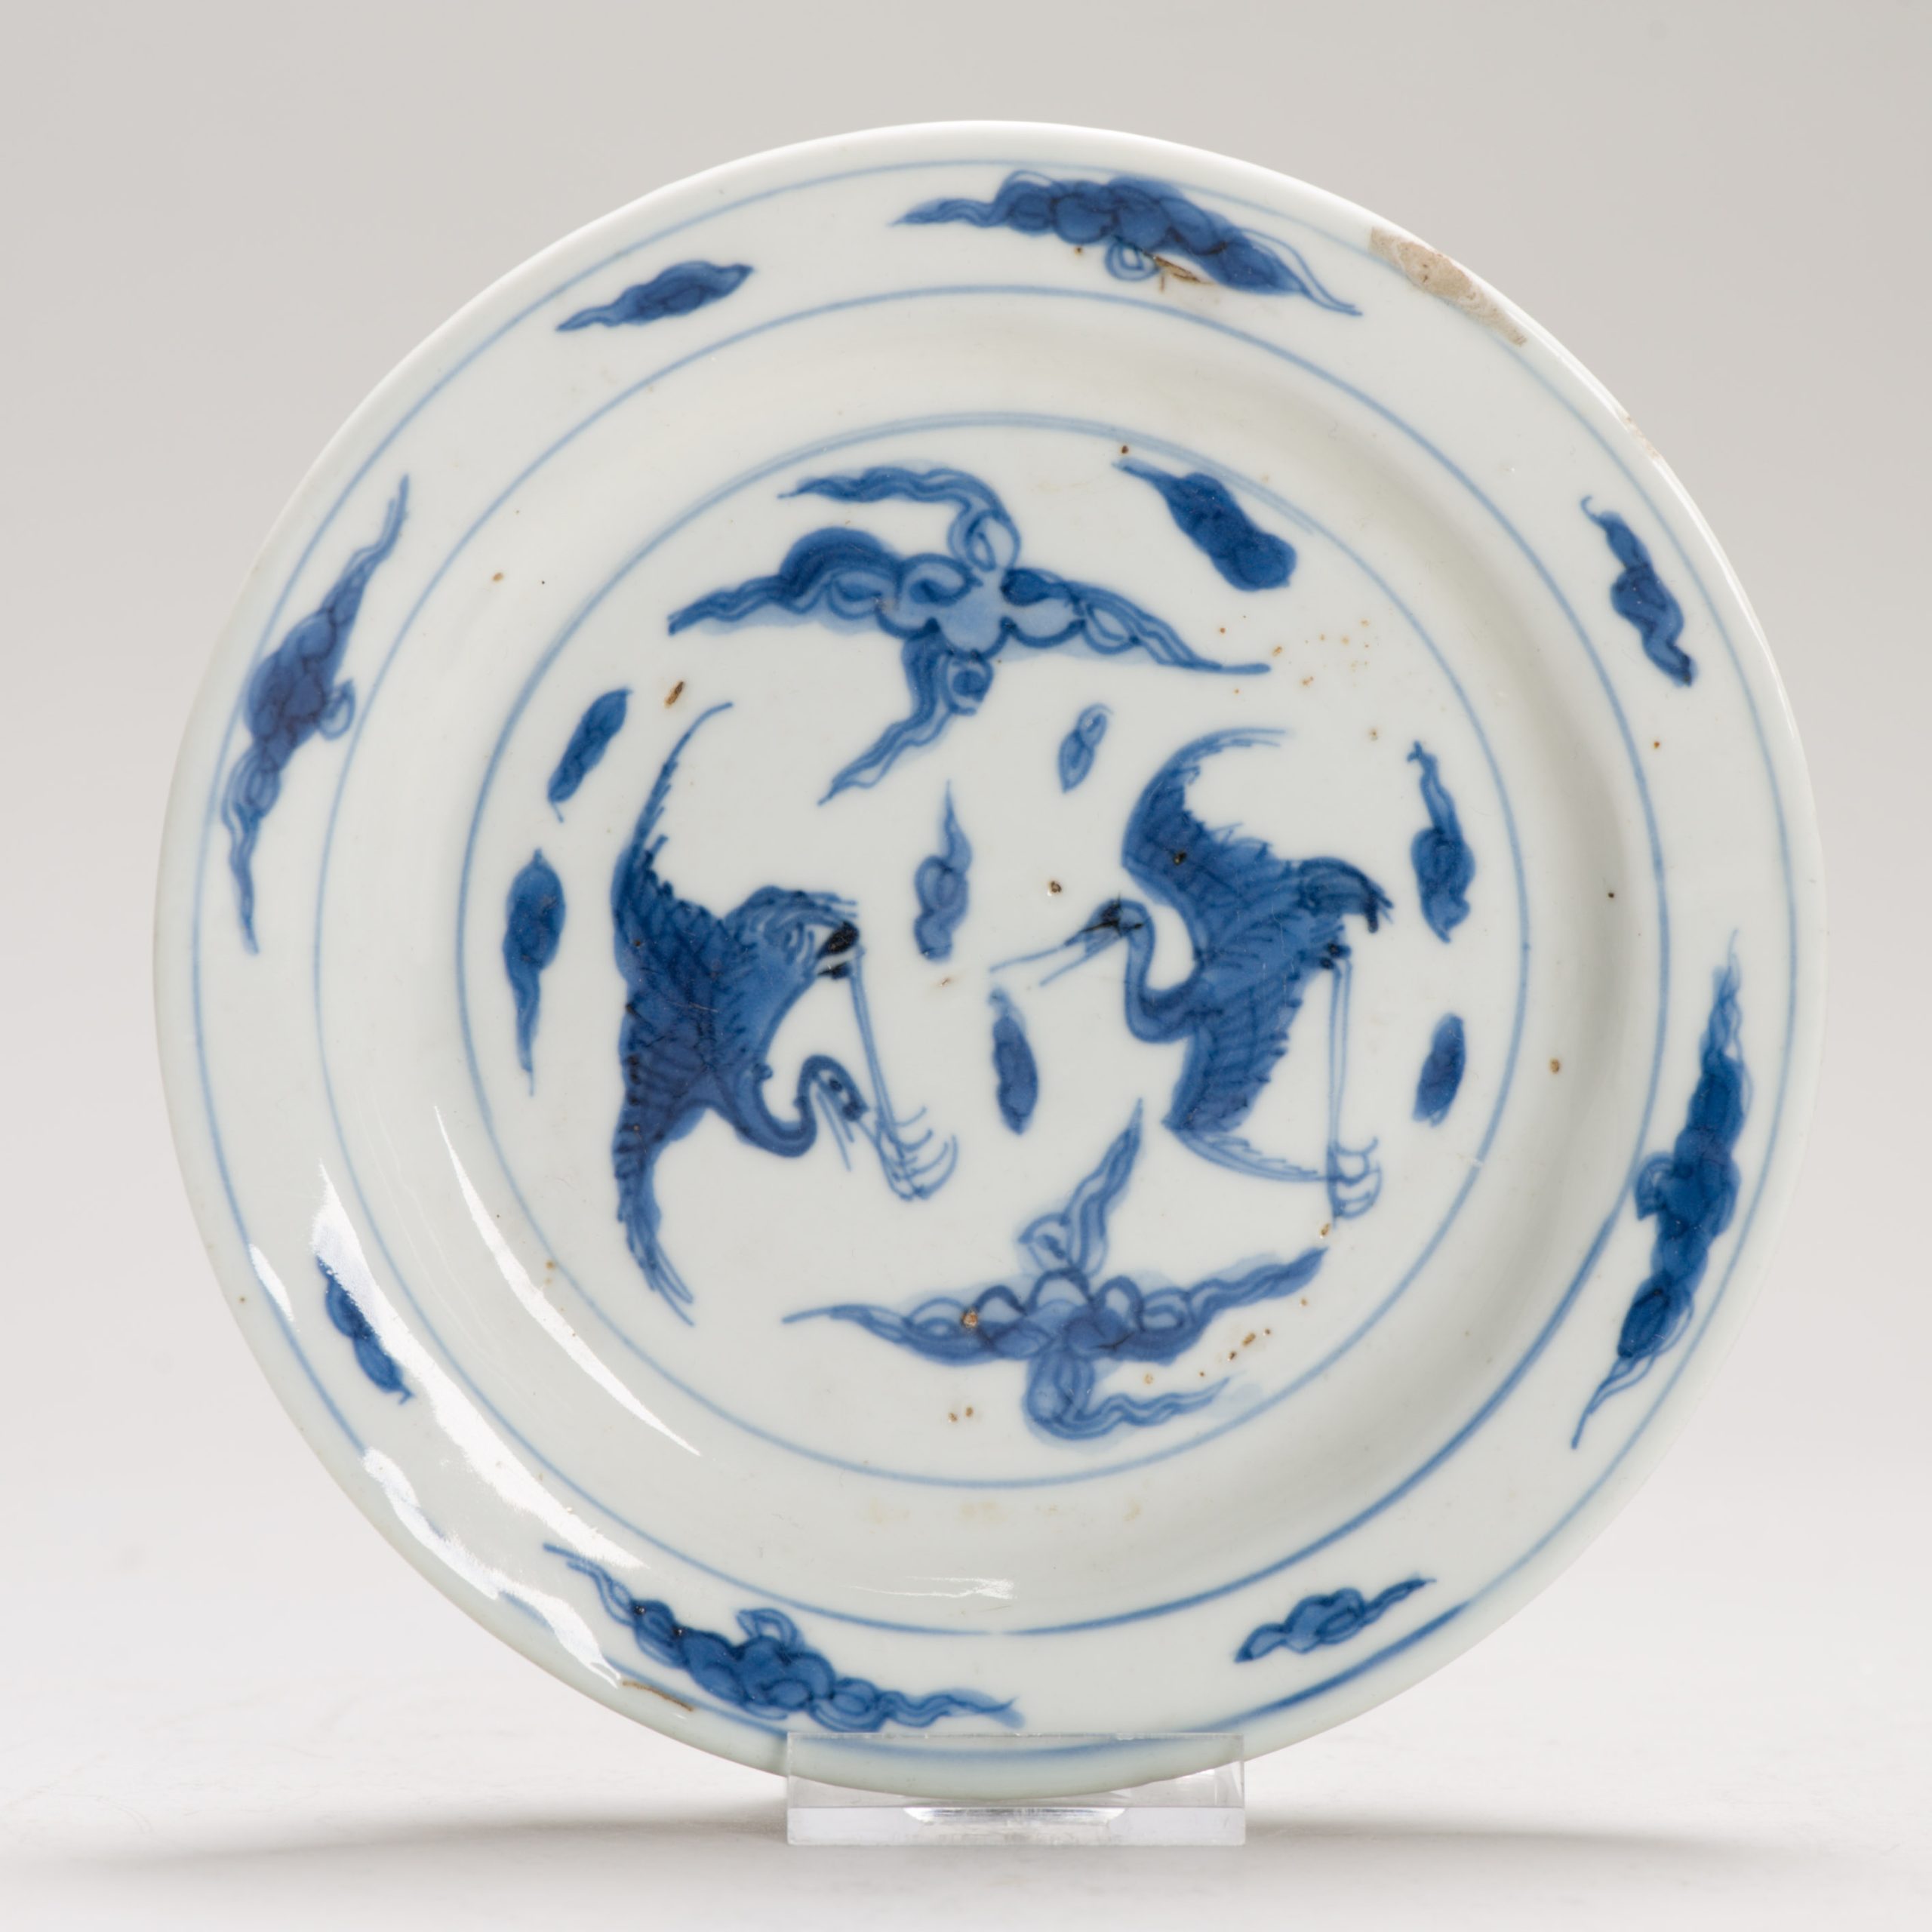 1238 Lovely Ming Sky Crane plate with a nice decoration